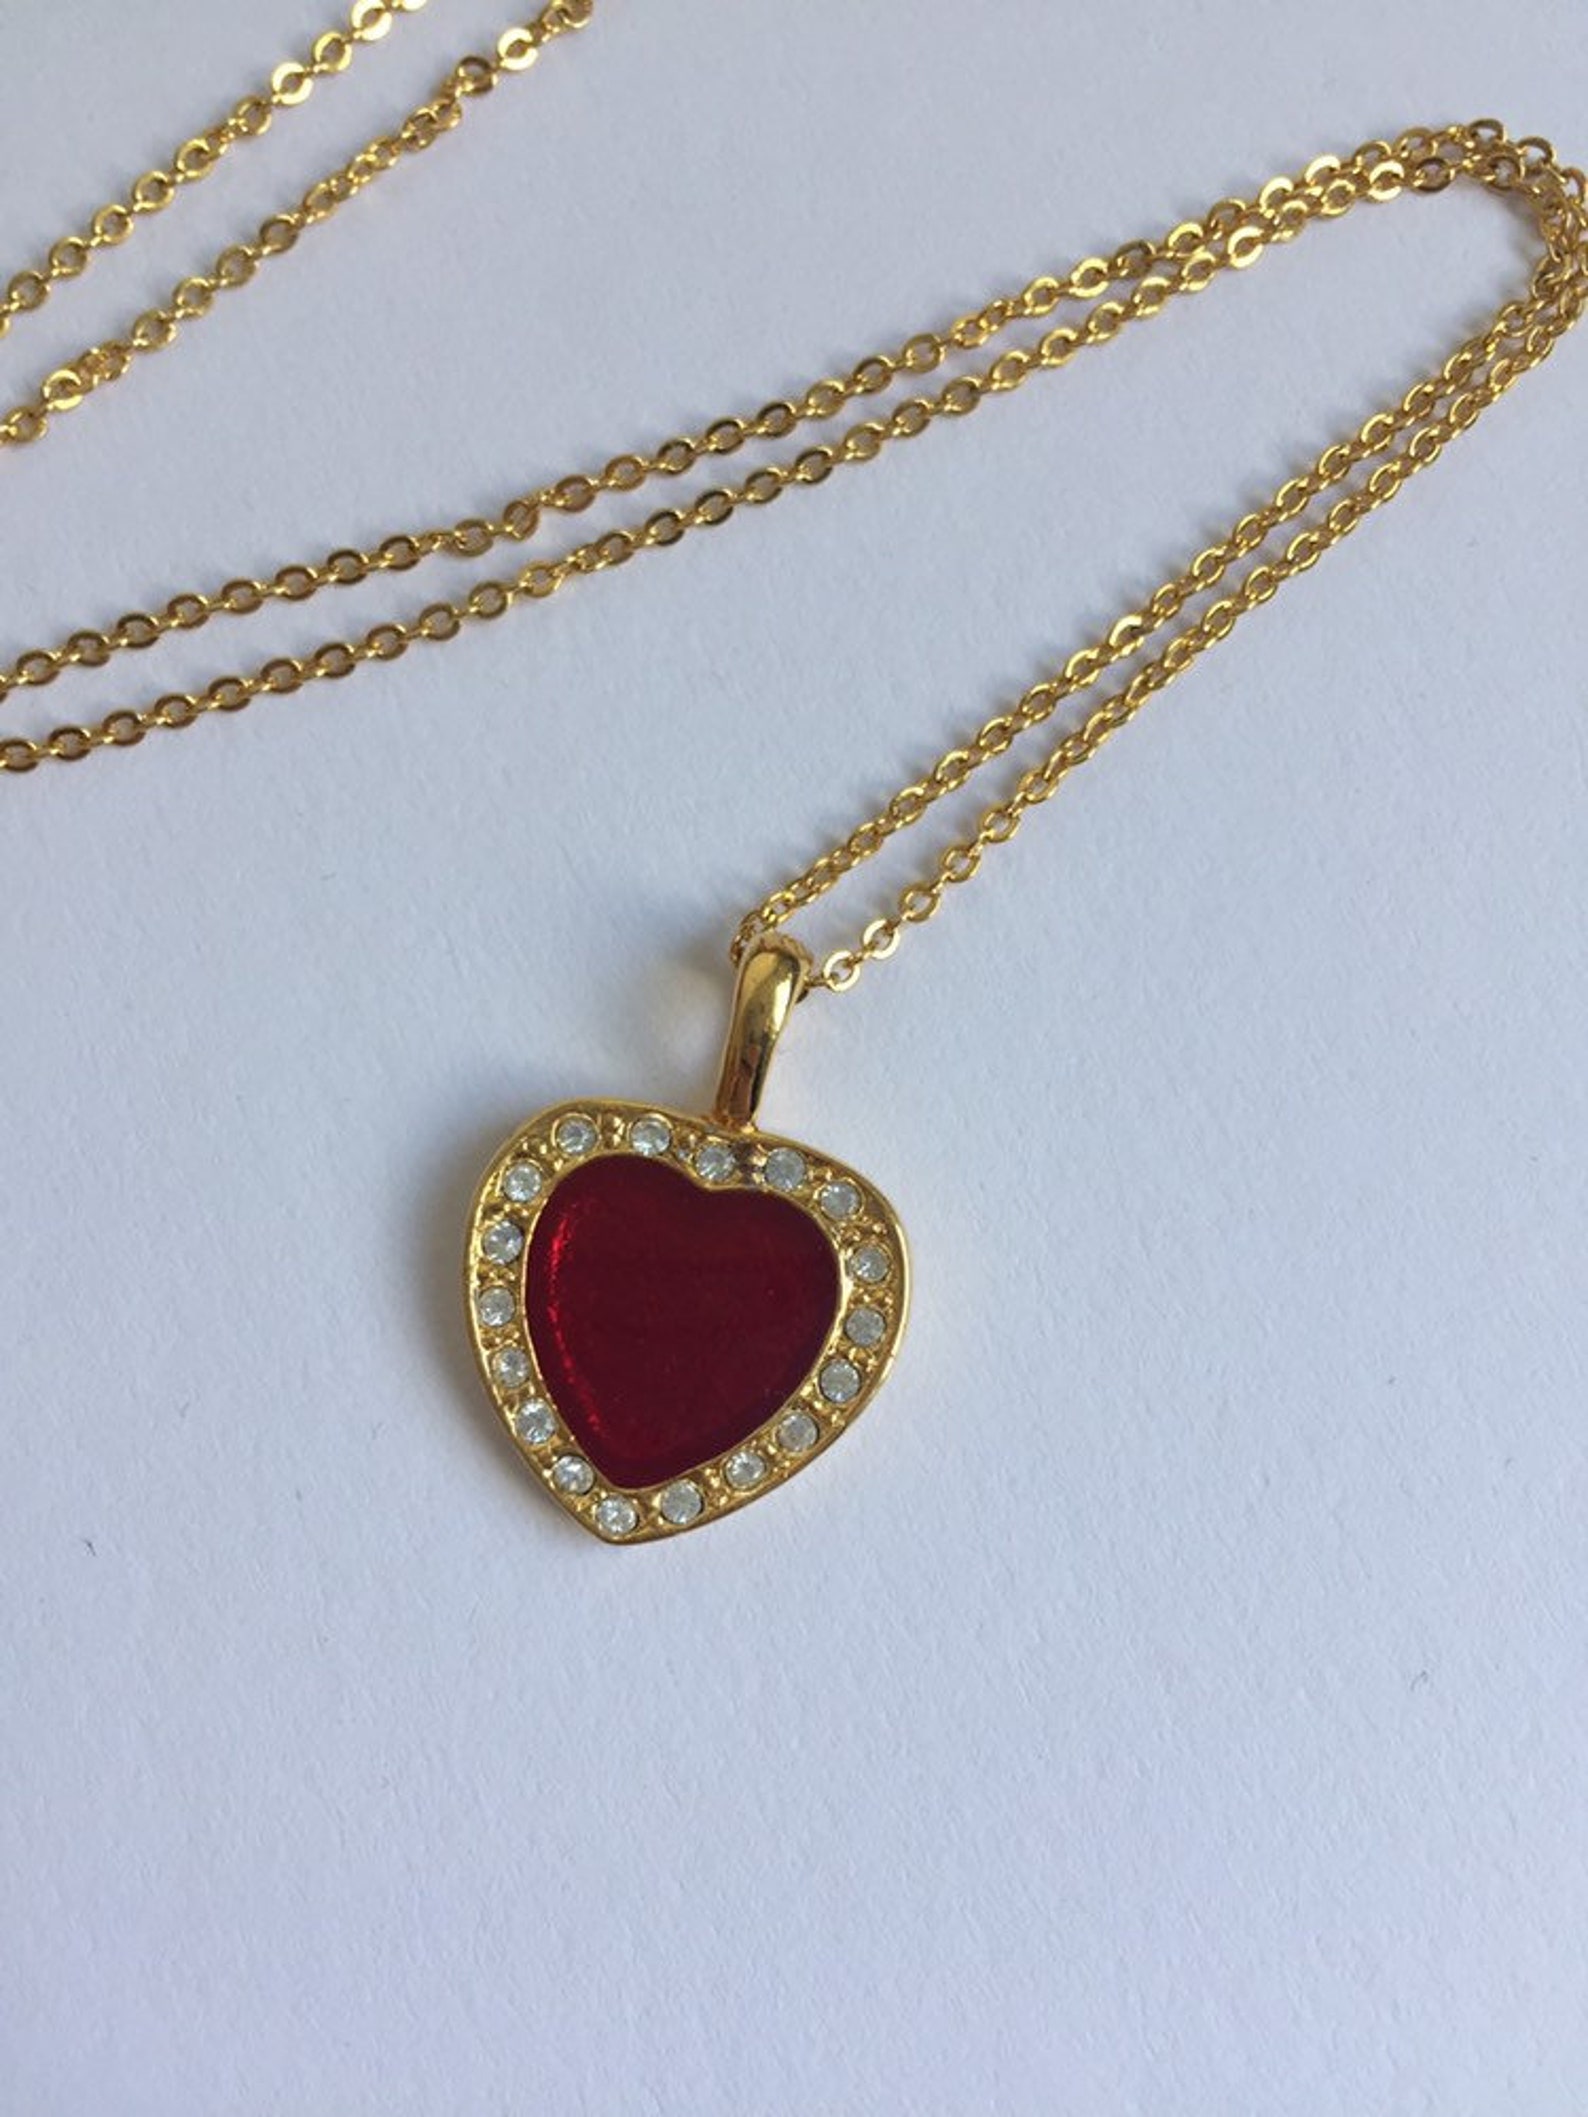 Vintage Red Heart Gold Chain With Heart-shaped Pendant Red | Etsy